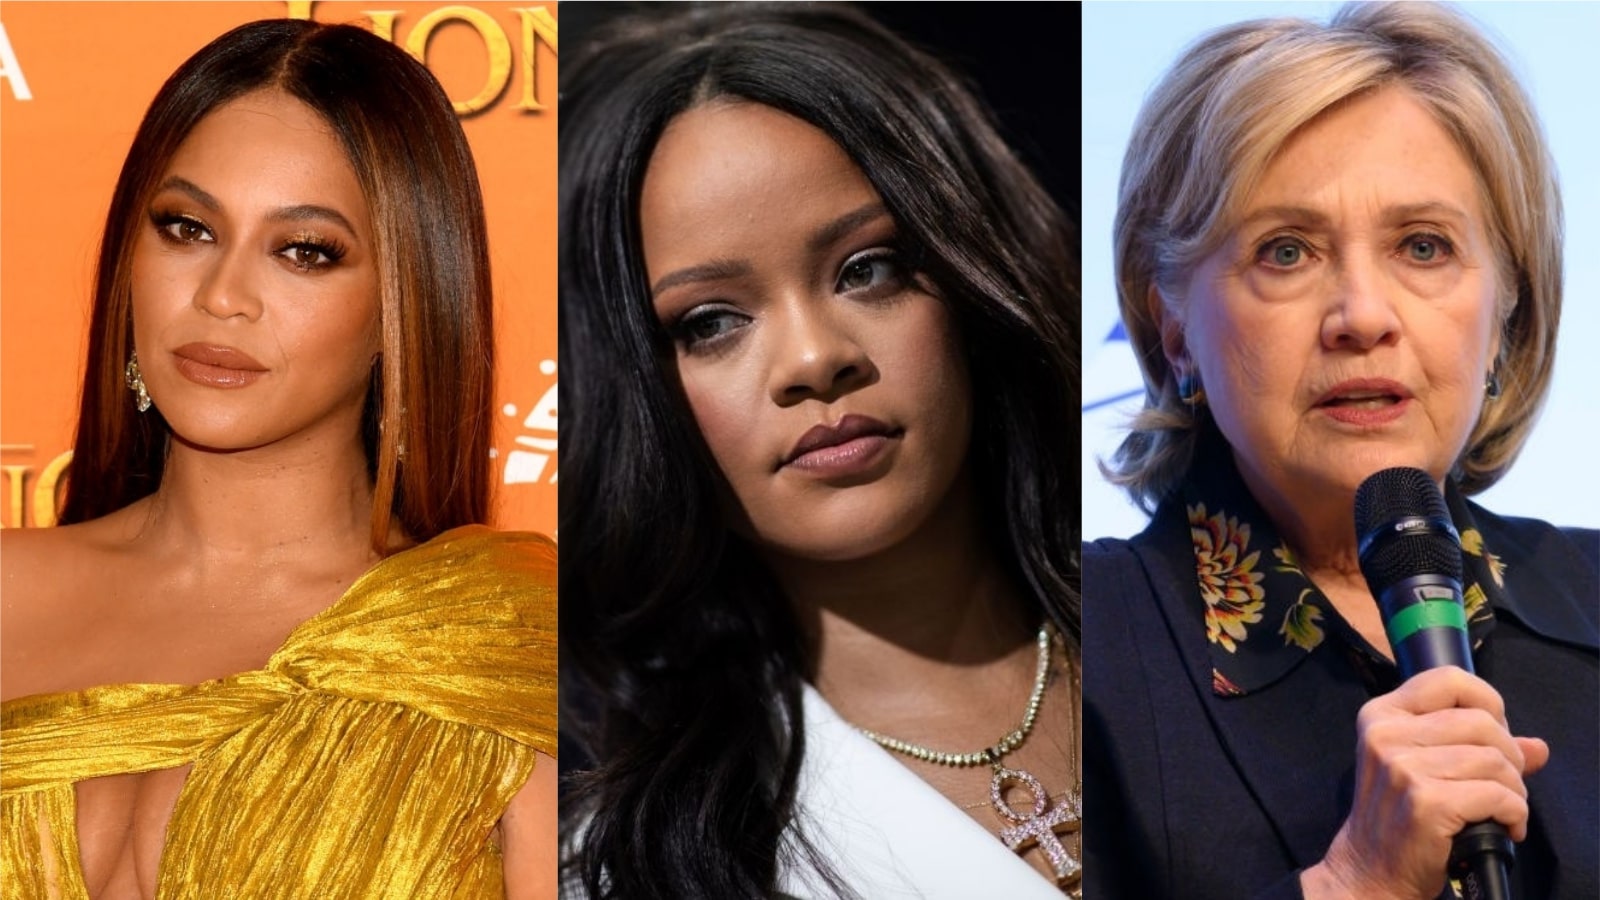 'It is Unbearable To Watch': Rihanna, Beyoncé, Hillary Clinton And More Speak Out In Solidarity With #EndSARS Protesters